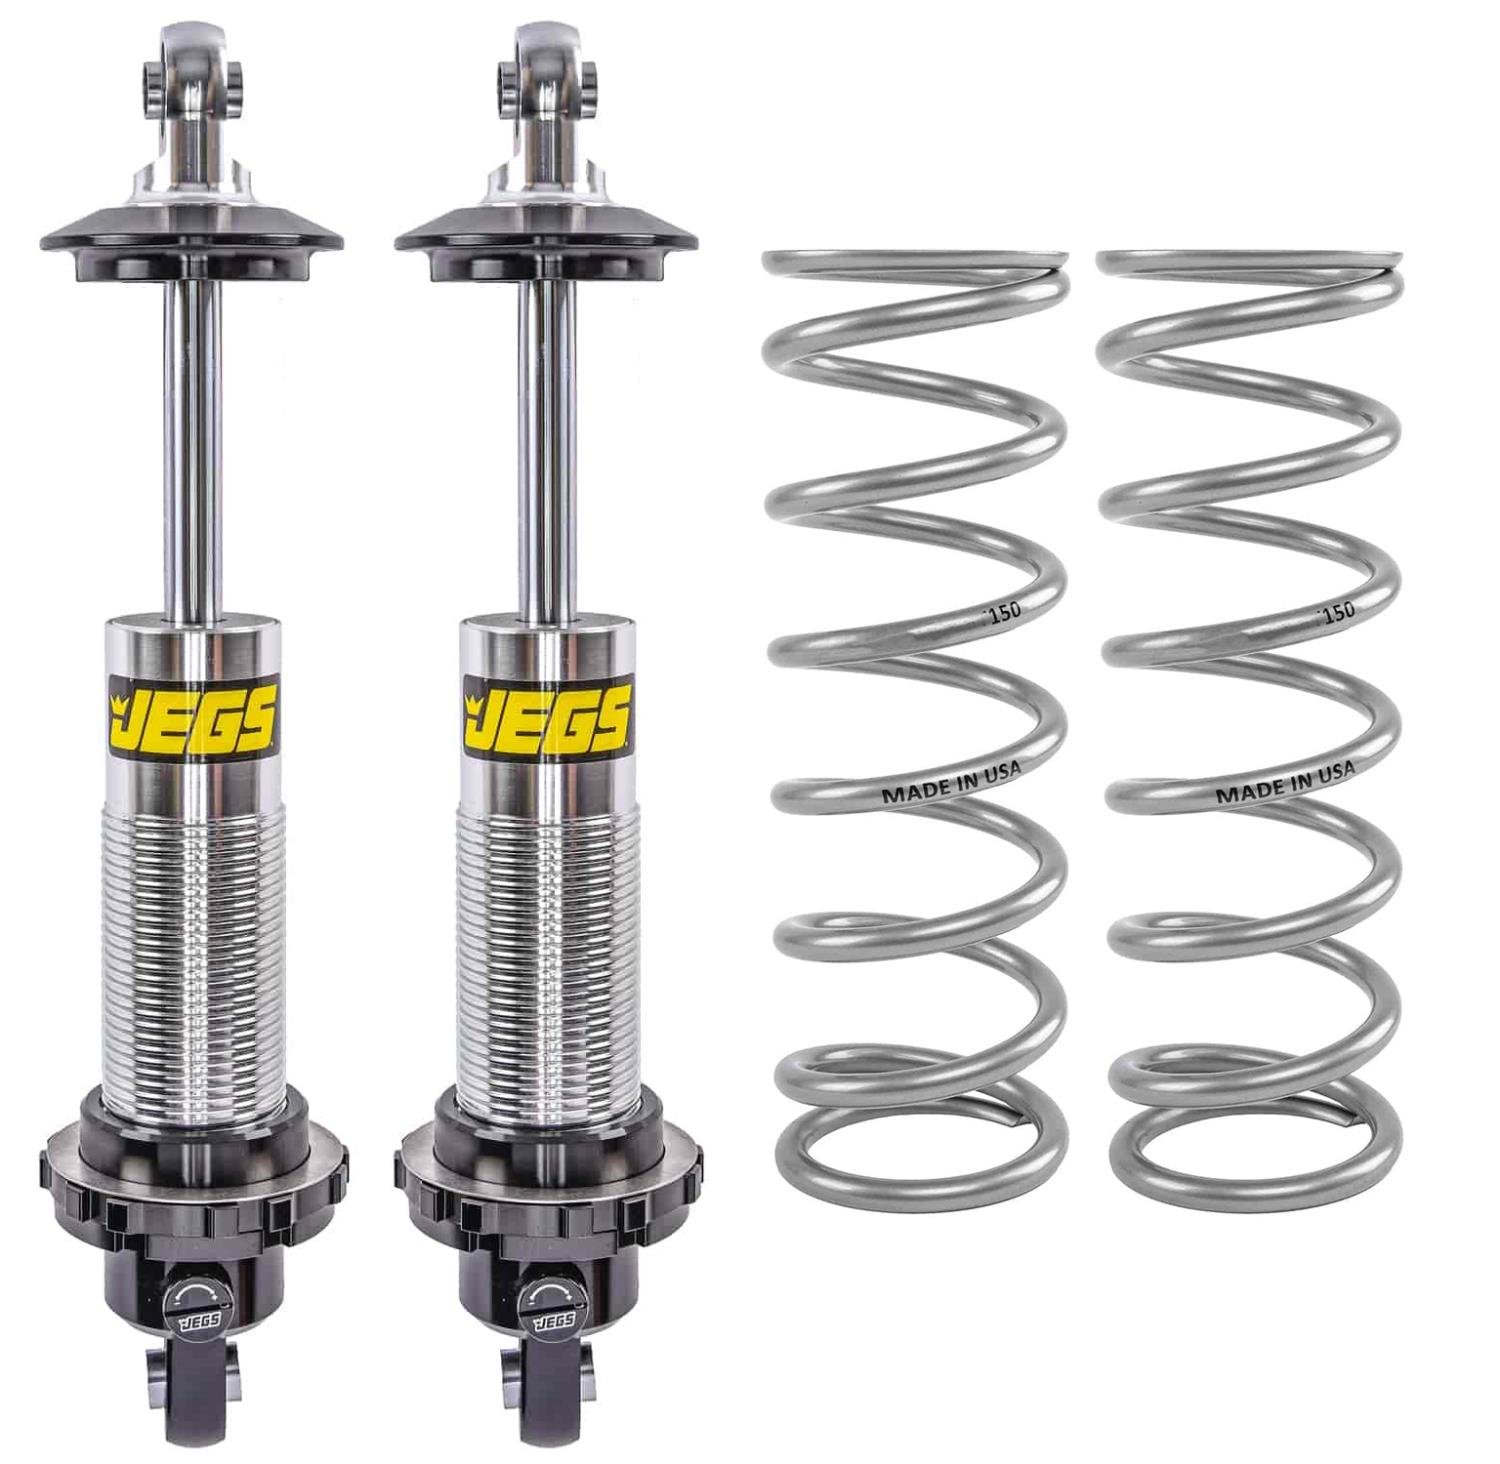 Single Adjustable Coil-Over Shocks and Coil-Over Springs Kit [10 in., 150 lbs./in. Springs]